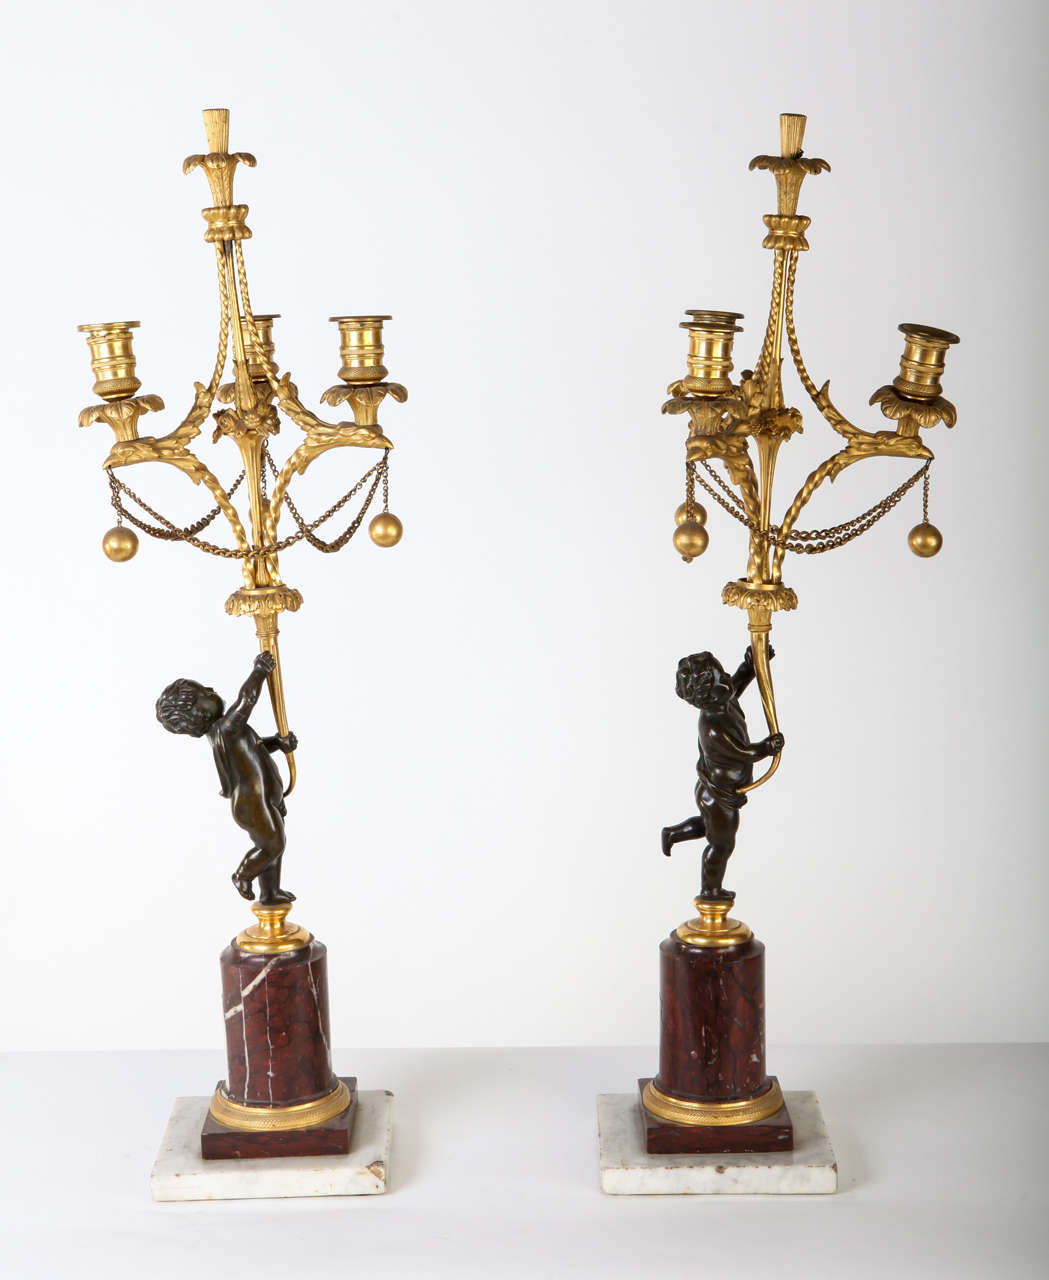 A fine pair of French 18th century bronze and gilt bronze candelabra, each in the form of putto figures holding aloft three scrolled candle-branches on a red marble and a square white marble base.
Size: cm 72 x 22.